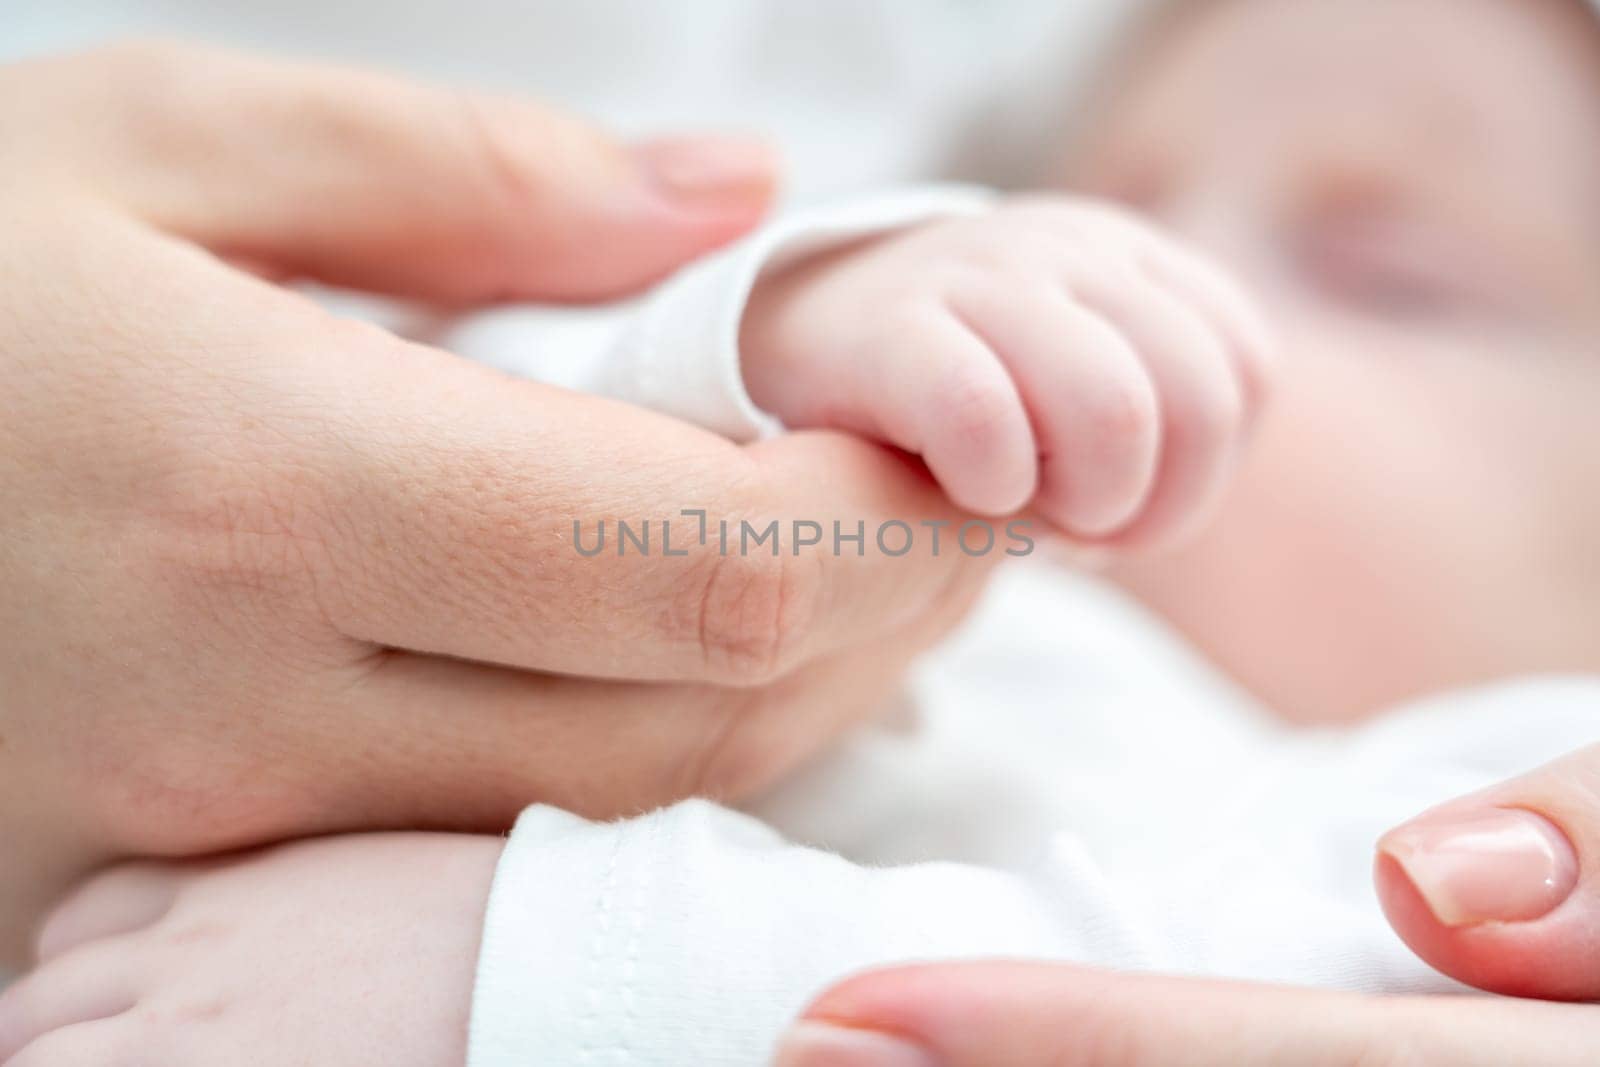 Close-up portrays a sleeping newborn baby softly gripping mother's finger, symbolizing trust and care